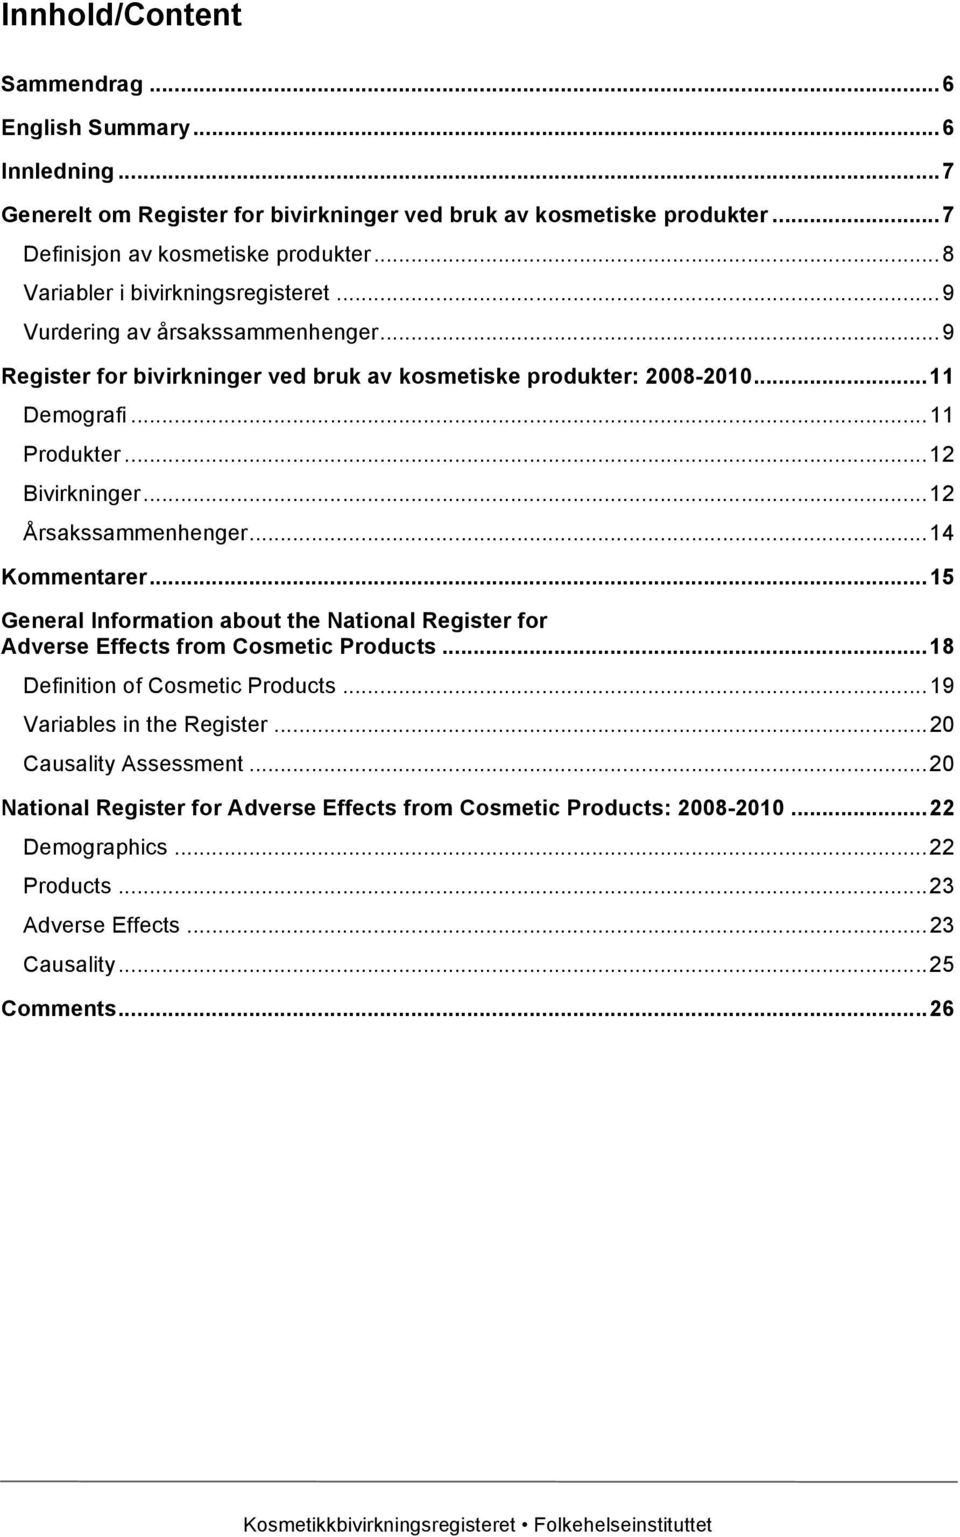 ..12 Bivirkninger...12 Årsakssammenhenger...14 Kommentarer...15 General Information about the National Register for Adverse Effects from Cosmetic Products...18 Definition of Cosmetic Products.